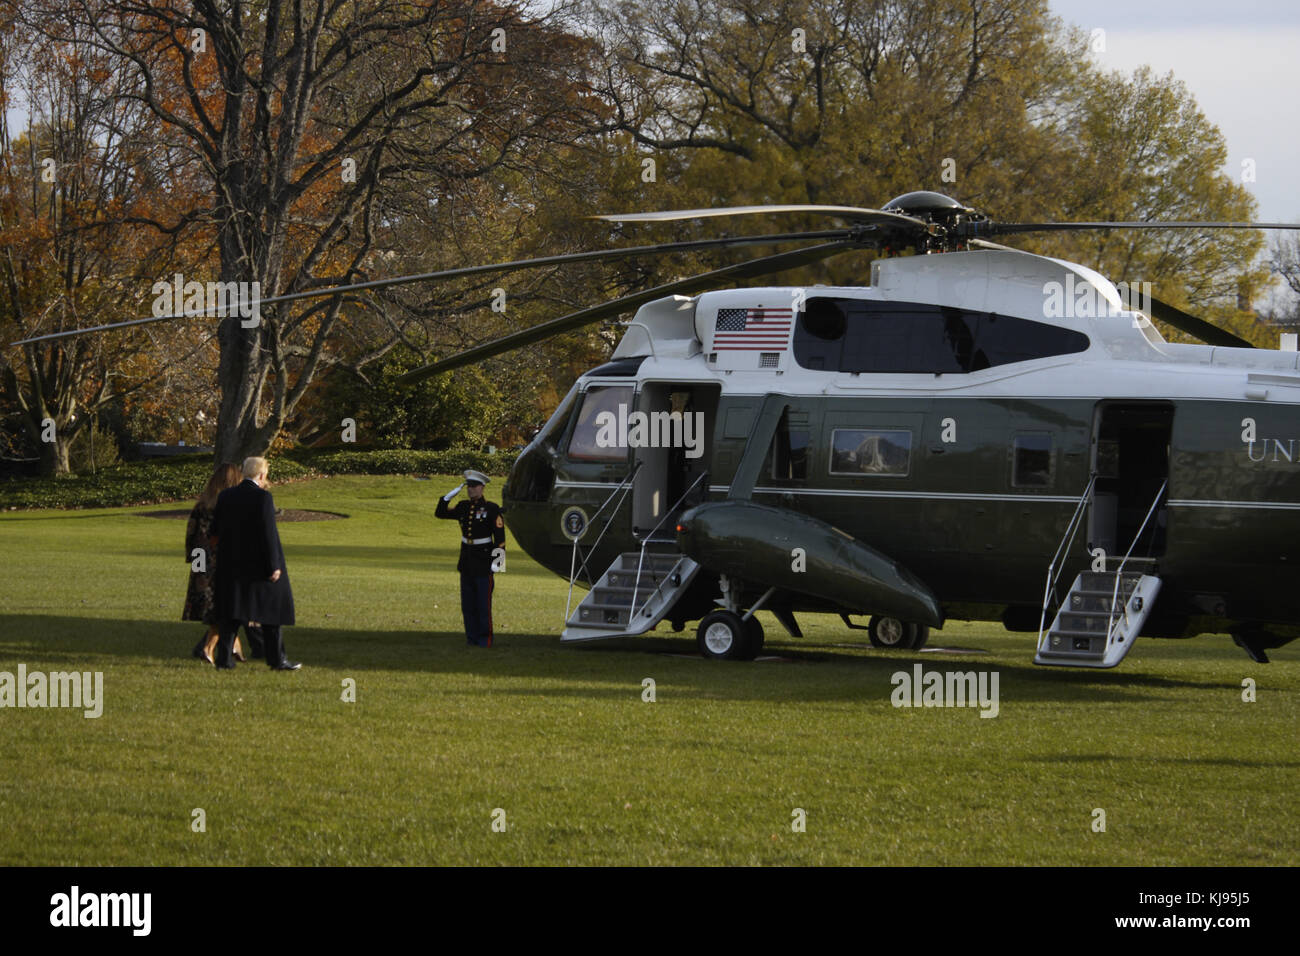 Washington, District of Columbia, USA. 21st Nov, 2017. President Donald Trump, First Lady Melania Trump and son Barron Trump walking towards a marine Sikorsky VH-3D Sea King helicopter waiting for them on the South Lawn of the White House, to take them to Joint Base Andrews. Seen in the background is the Washington Monument. Credit: Evan Golub/ZUMA Wire/Alamy Live News Stock Photo